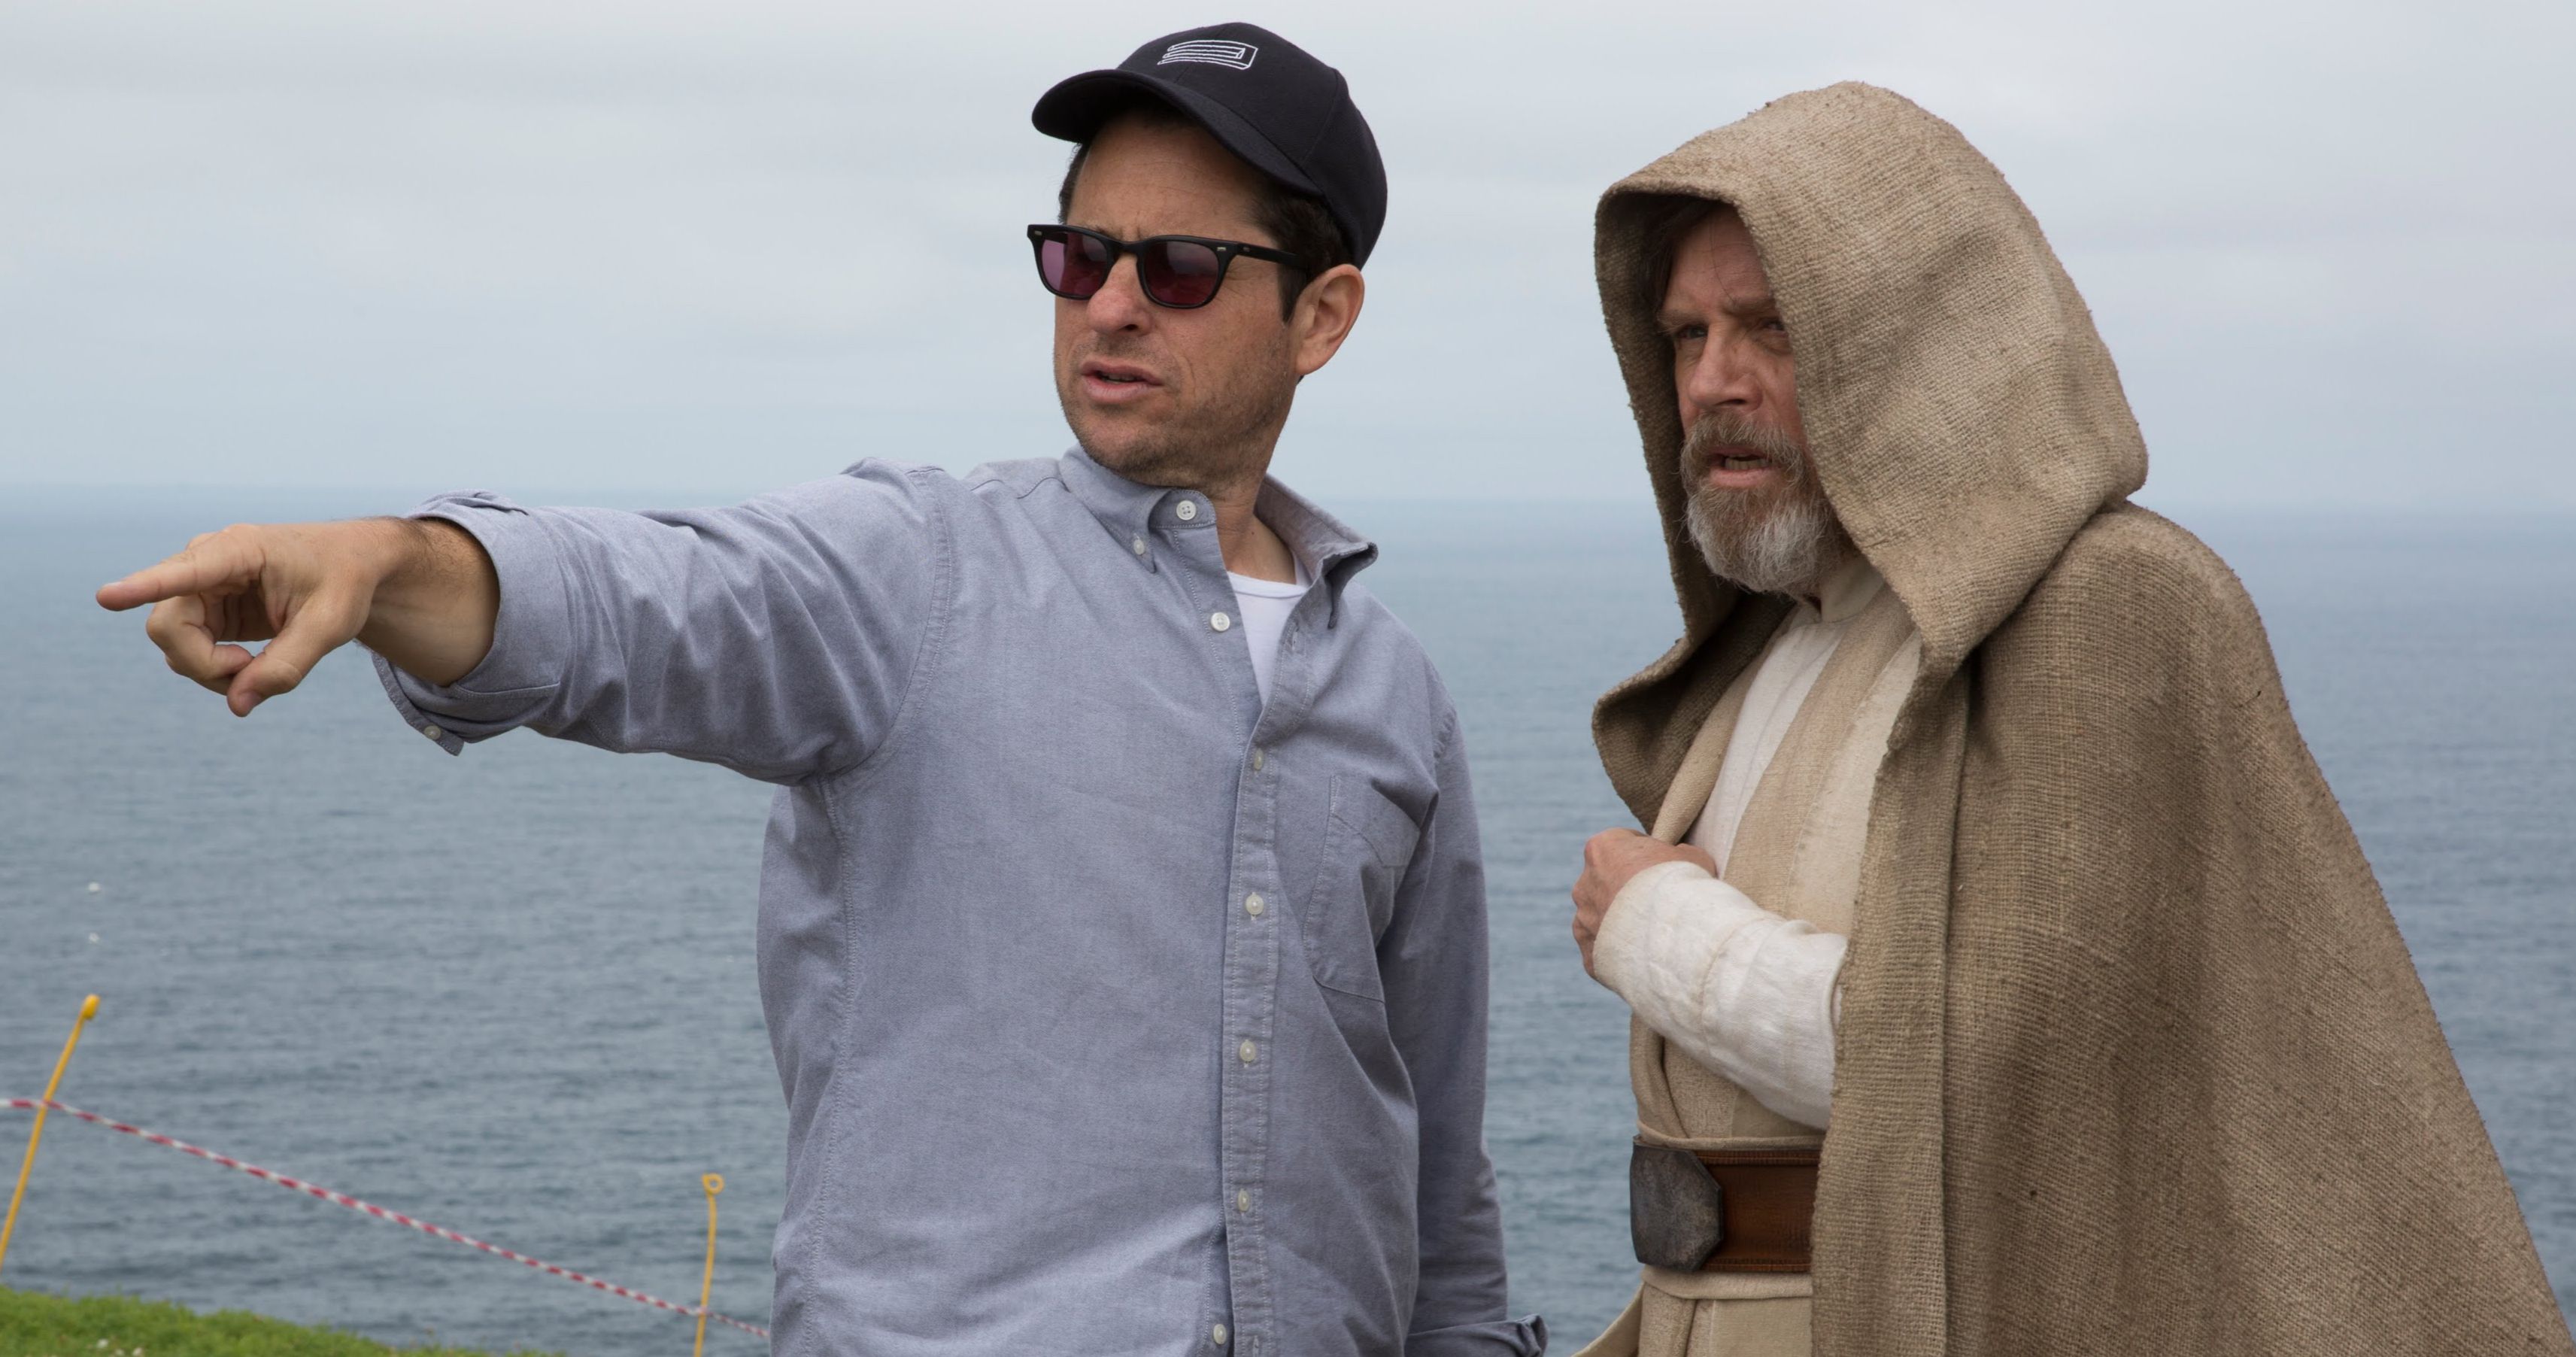 J.J. Abrams Closes in on $500M Mega-Deal with Either WarnerMedia or Apple